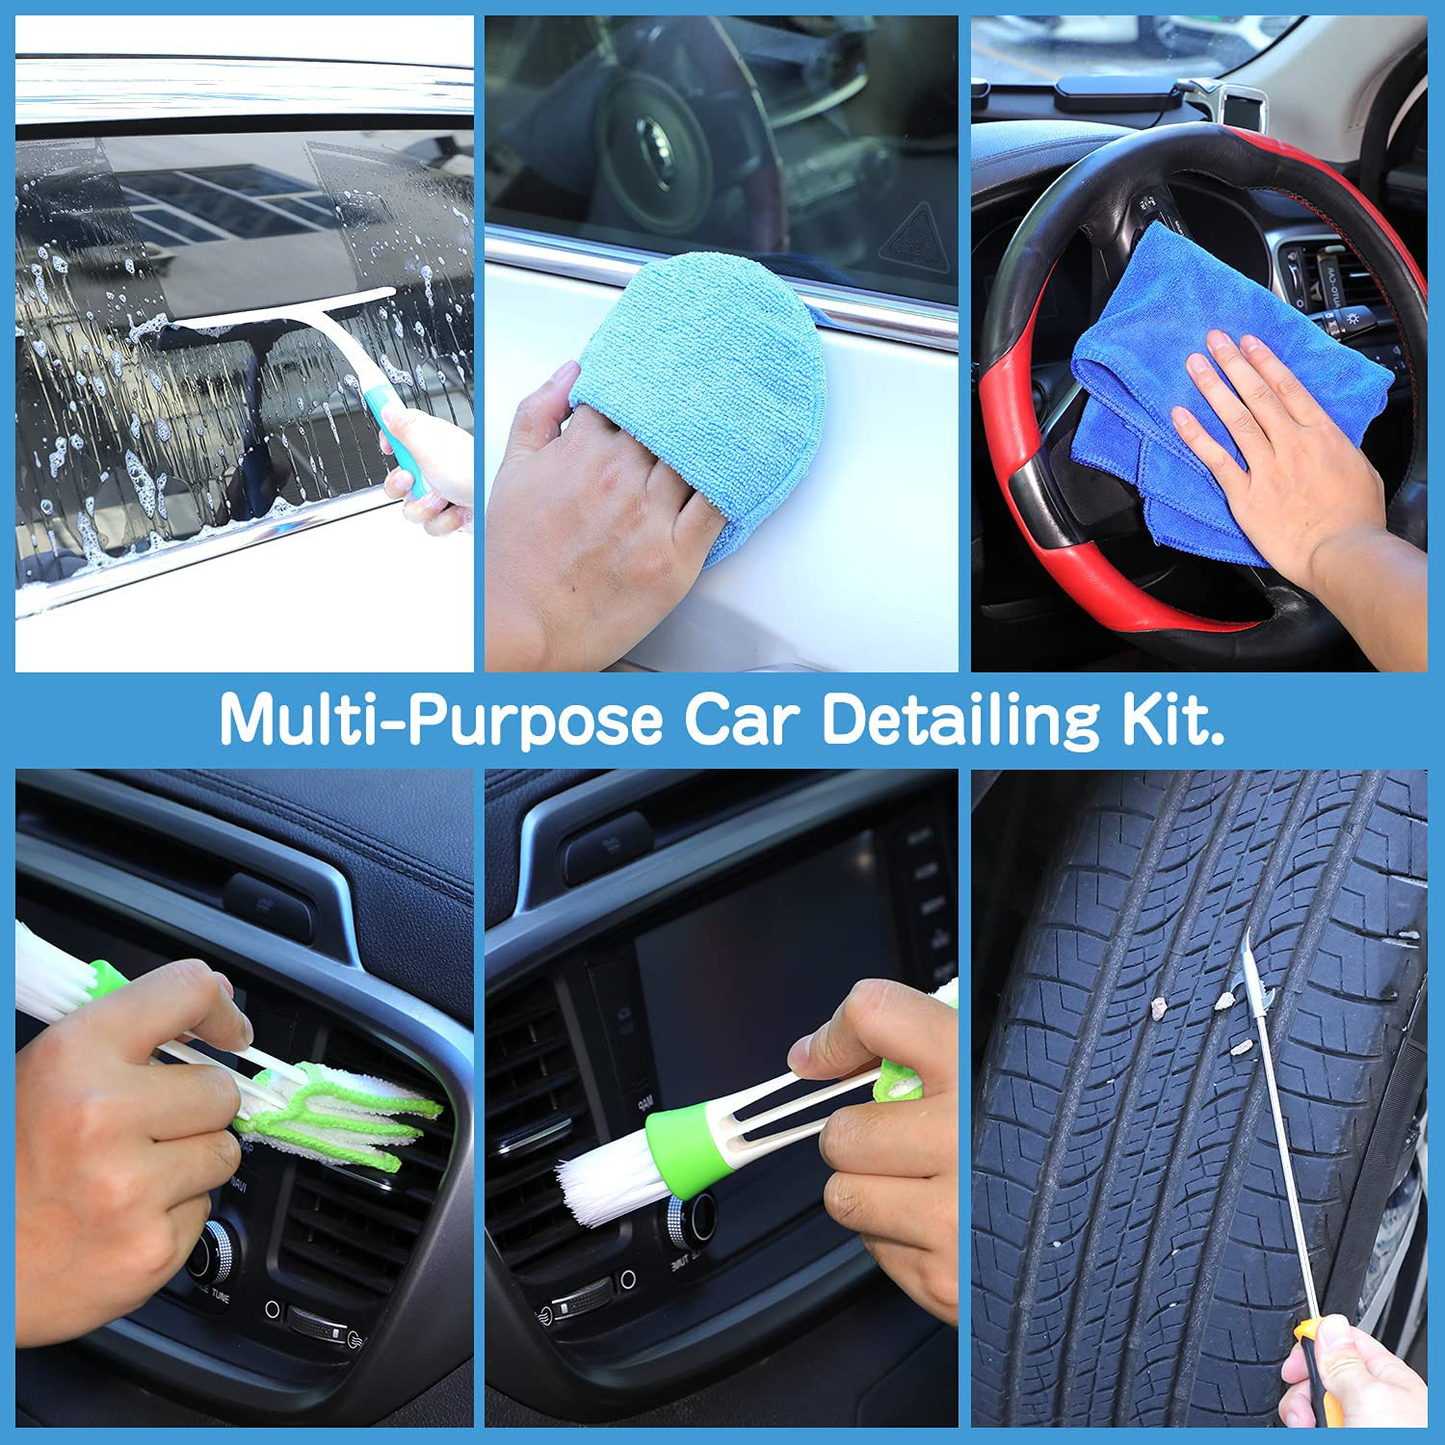 YOMIKI Car Wash Kit, Car Cleaning Tools Set Car Detailing Kit with Collapsible Bucket Wash Mitt Drying Towels Tire Brush Window Scraper Duster for Exterior Car Washing and Car Interior Cleaning